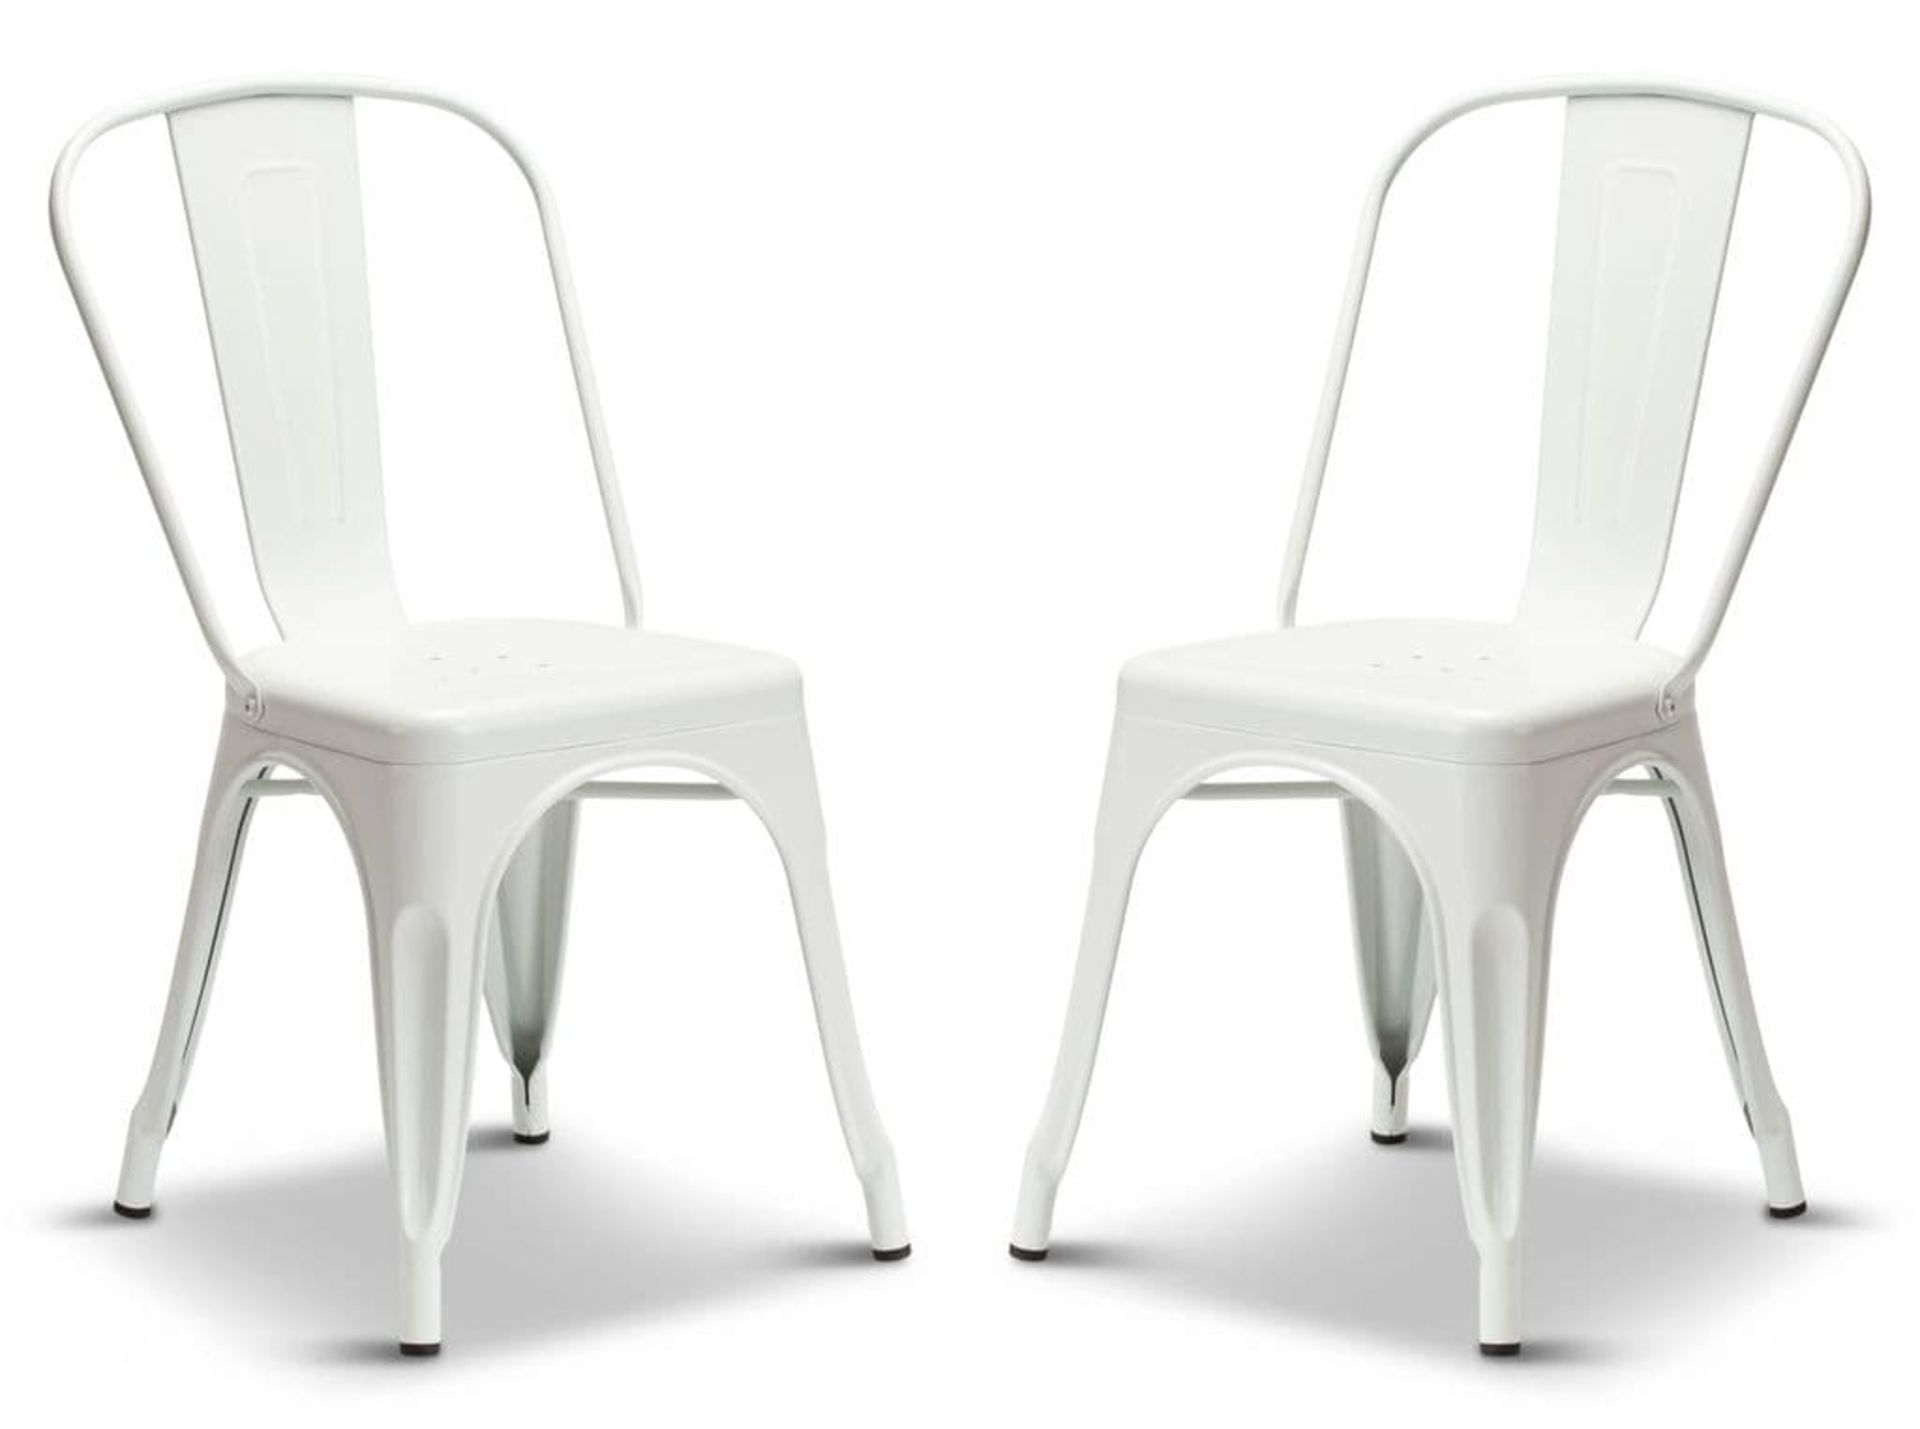 1 x Tolix Industrial Style Outdoor Bistro Table and Chair Set in White- Includes 1 x Table and 4 x - Image 10 of 13